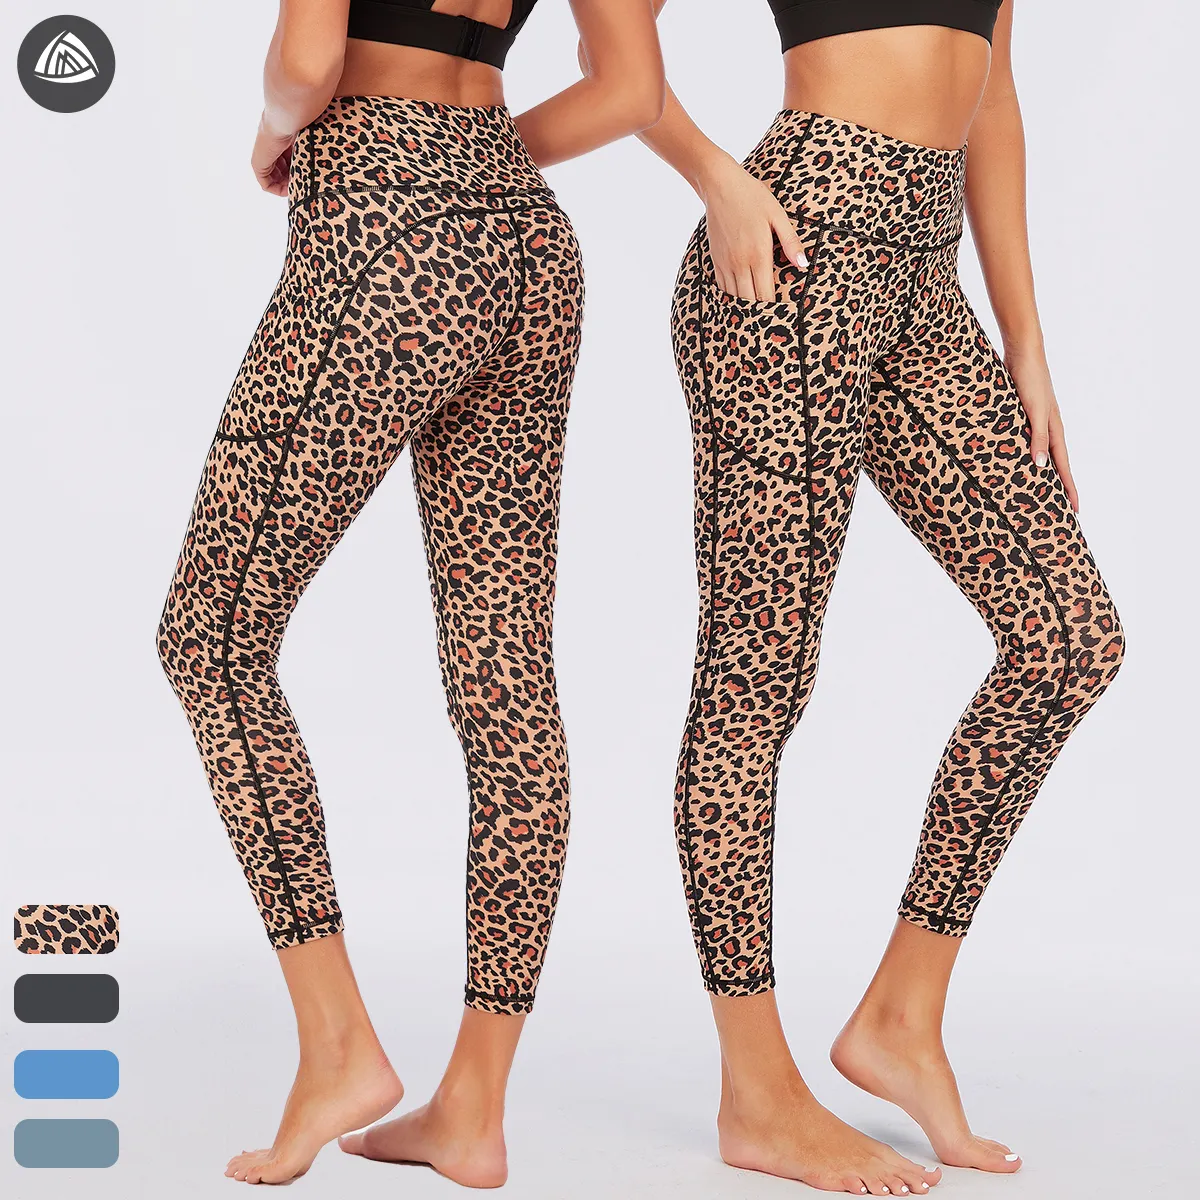 Fashion Leopard Workout Set Private Label Fitness Wear Womens Athletic Wear Leggings con stampa Leapord a vita alta